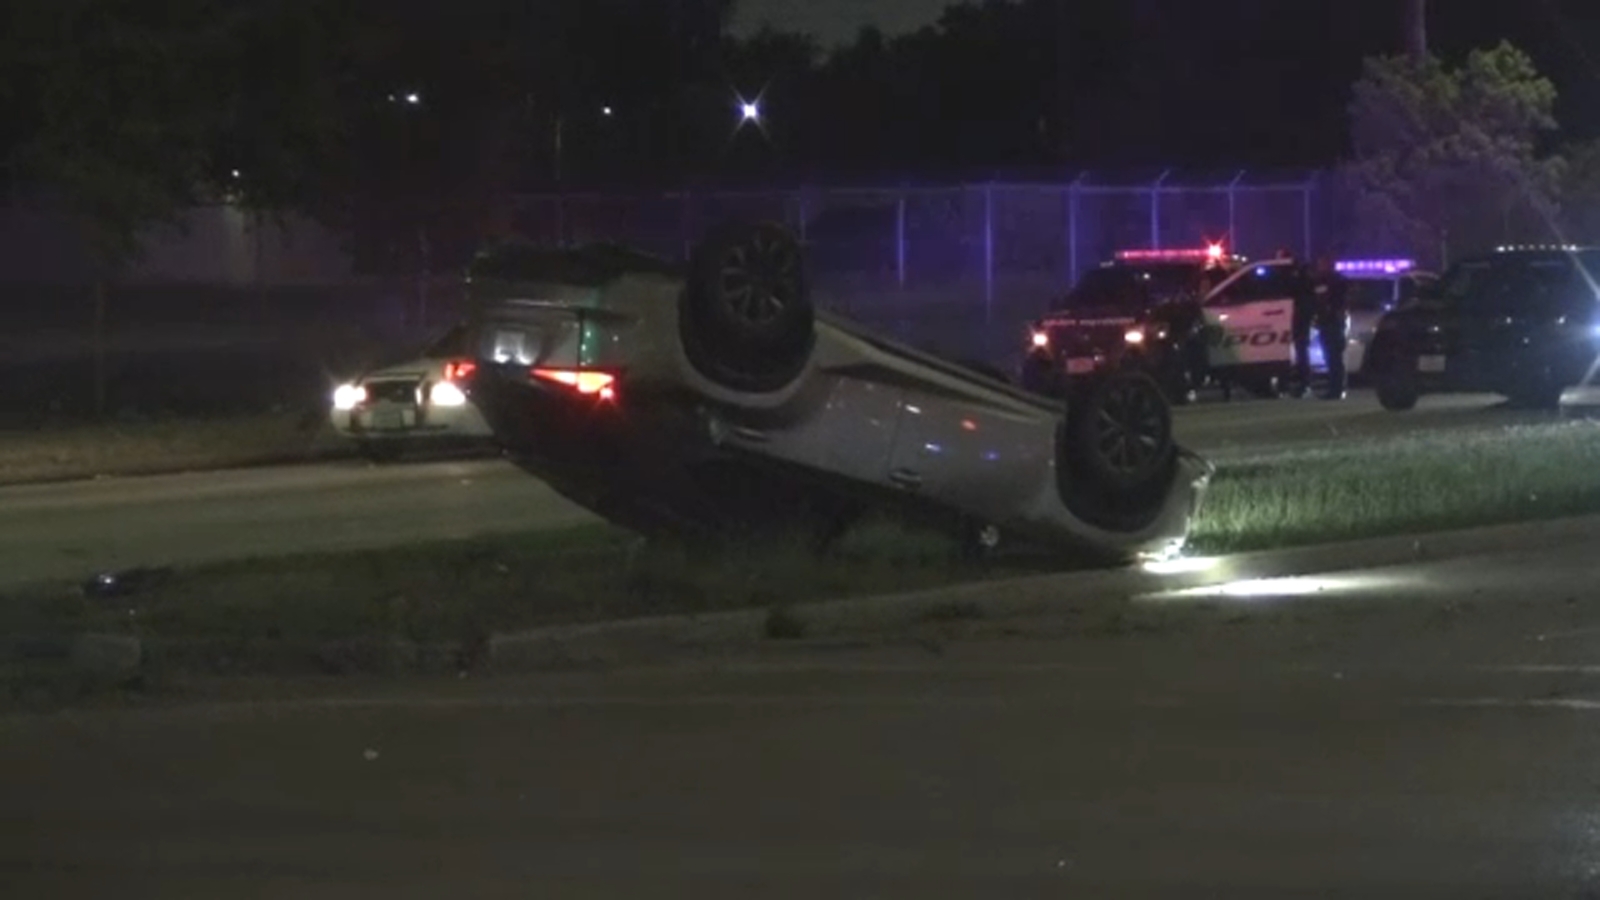 HPD officer-involved crash: Driver collides with Houston police cruiser responding to robbery in progress near Acres Homes area [Video]